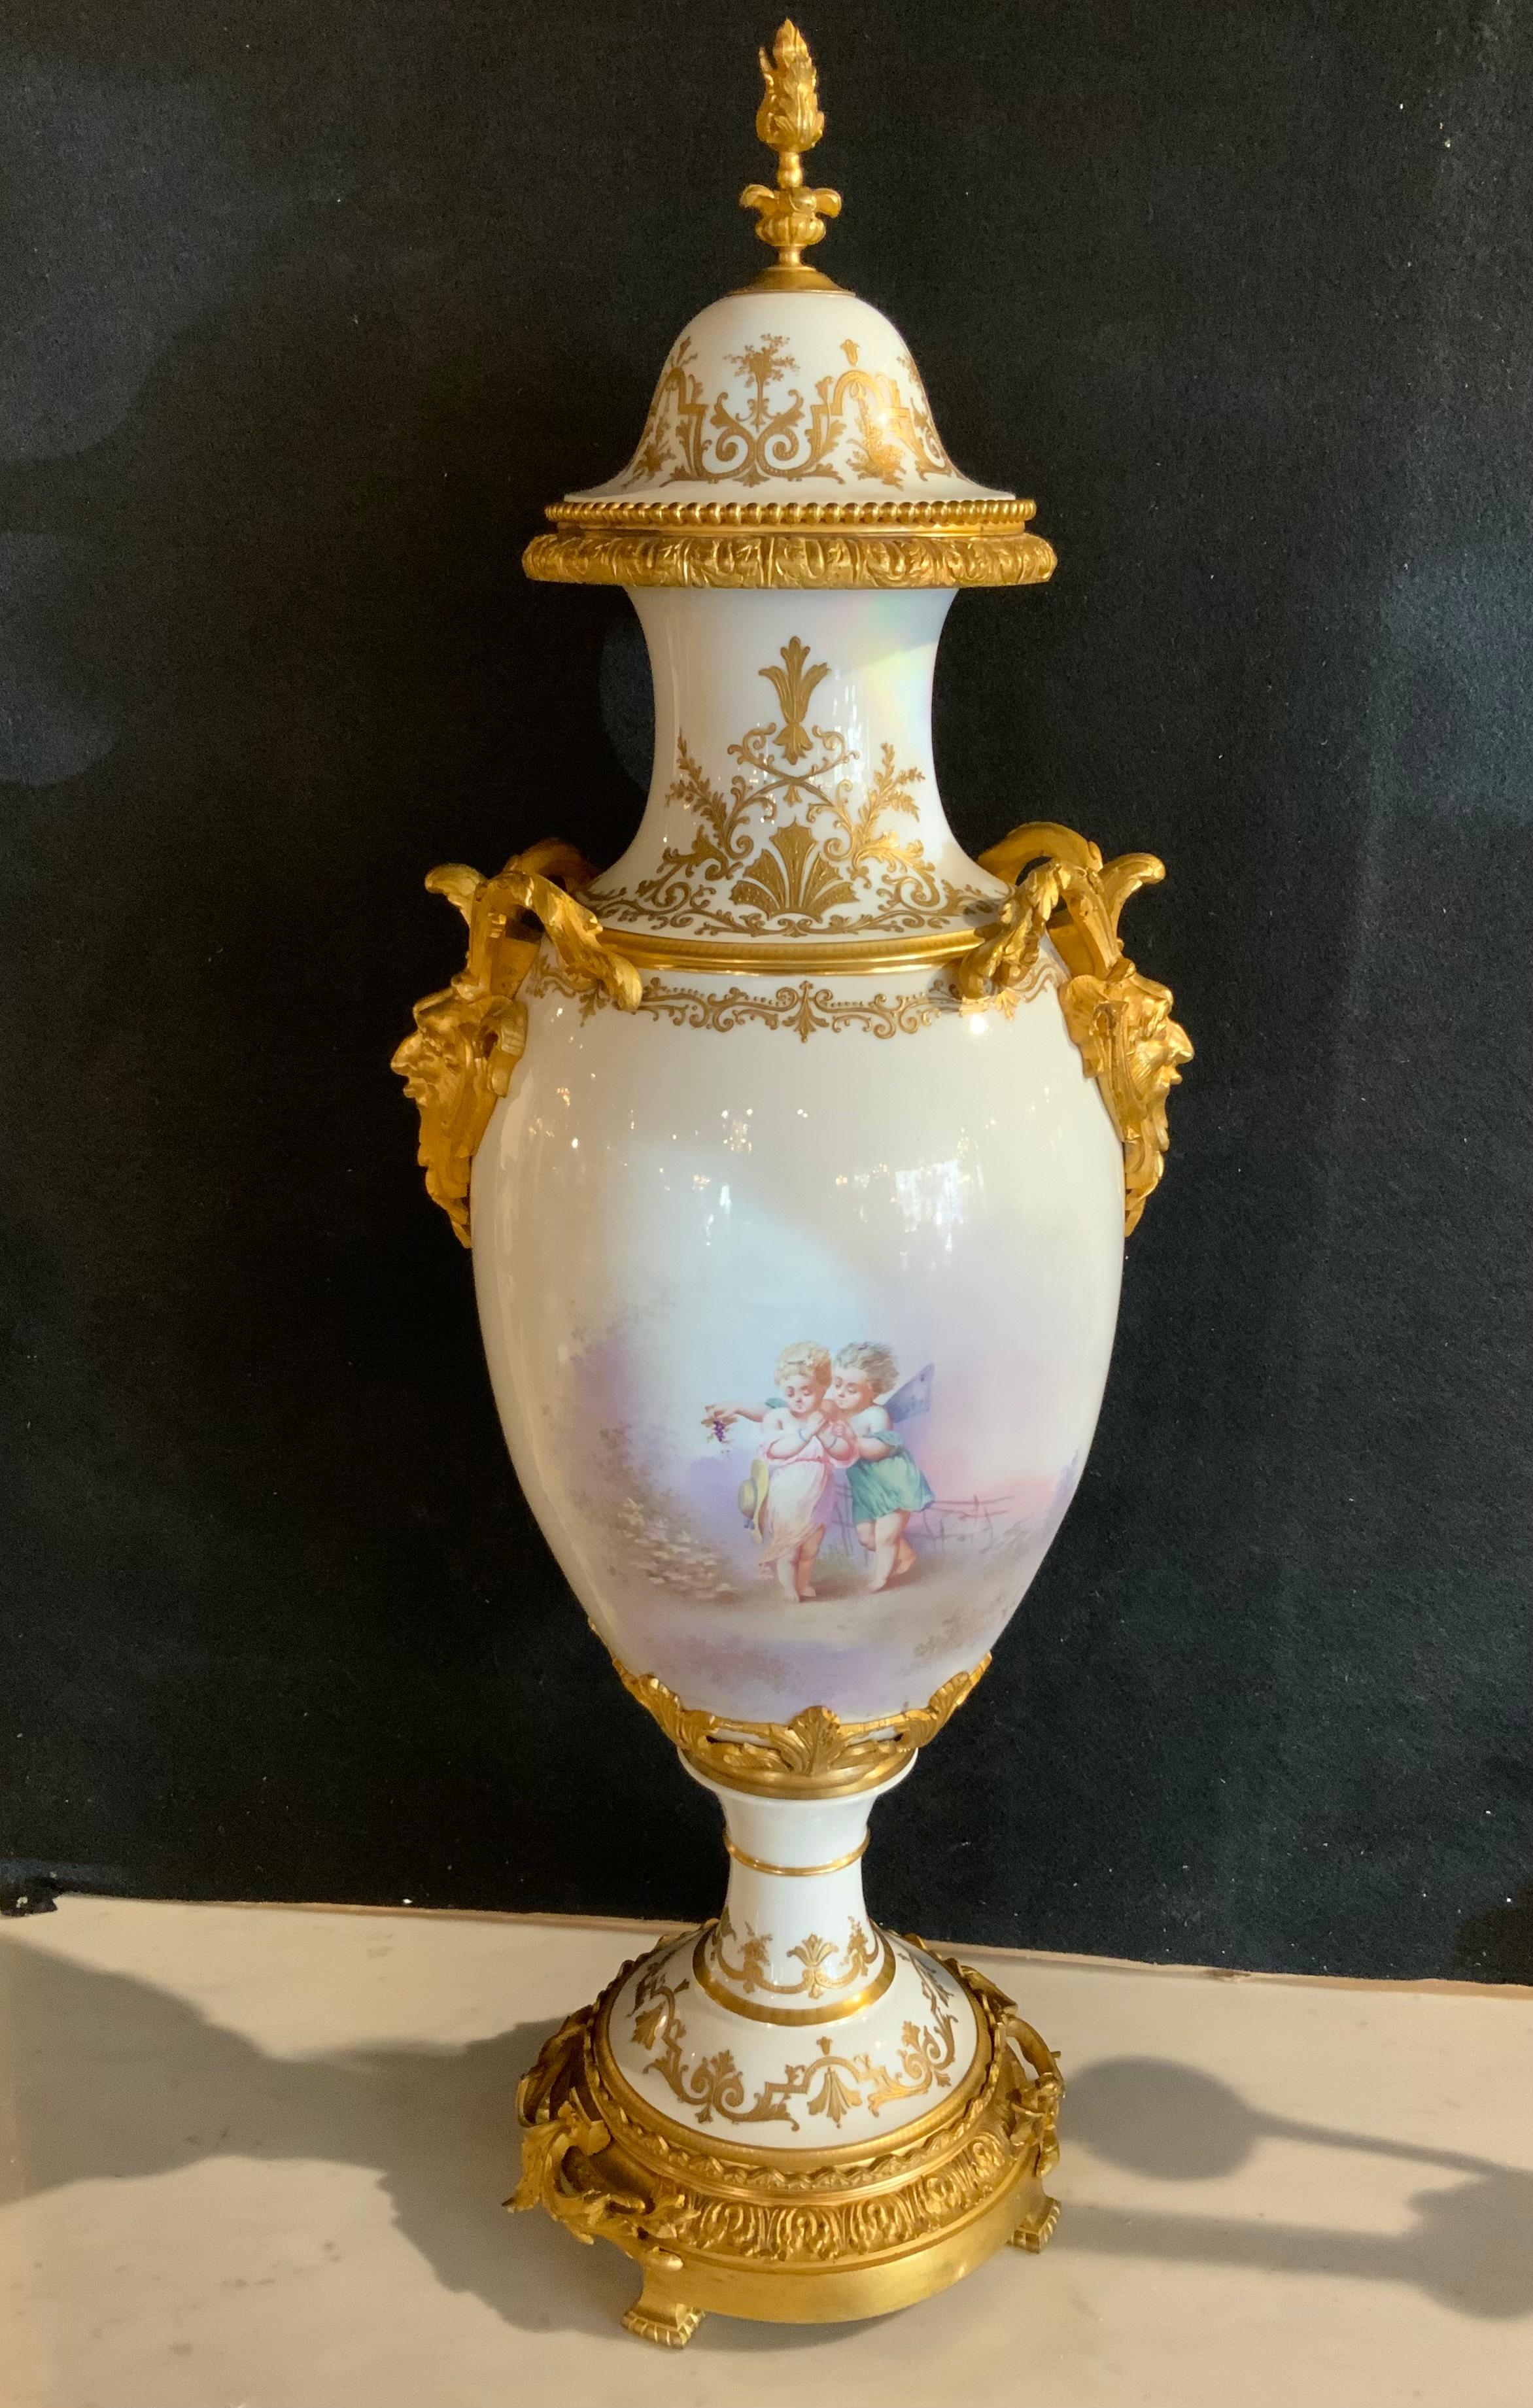 19th Century Sevres Urn 19 Th Century with Gilt Bronze Mounts and Gilt Masks, Hand Painted